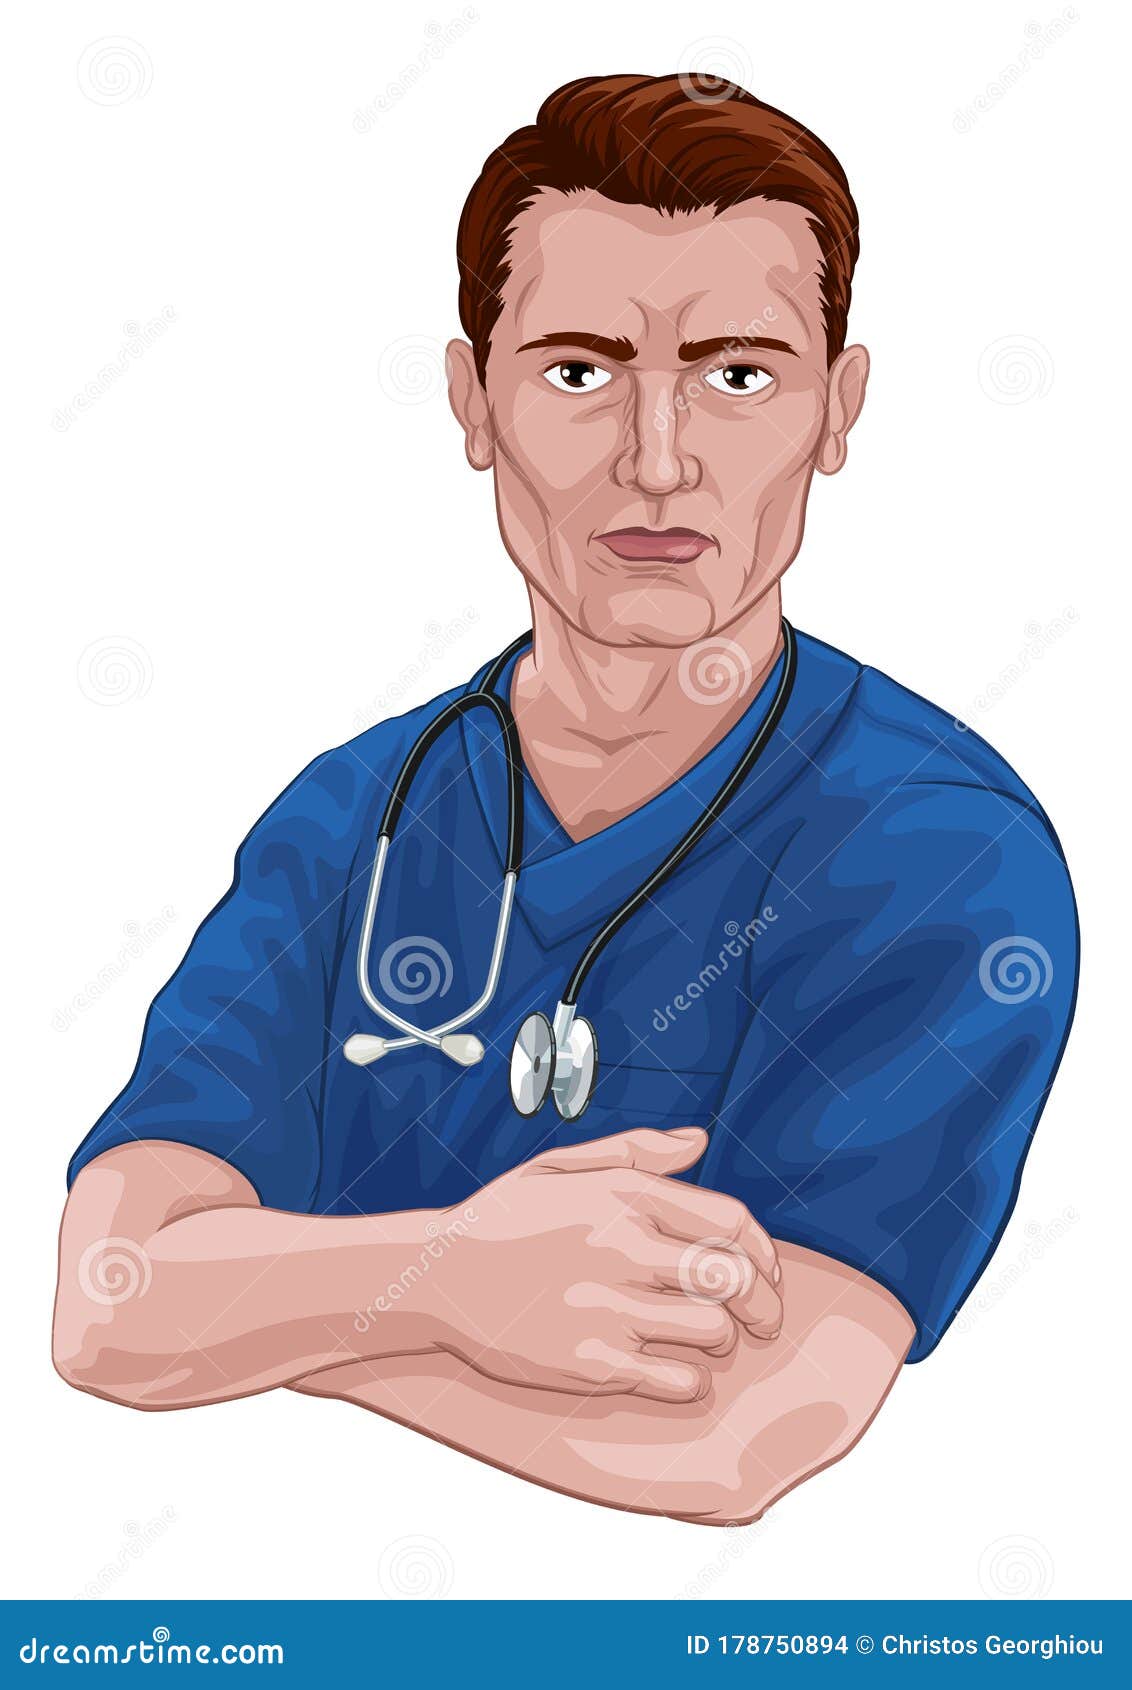 nurse or doctor in scrubs with stethoscope